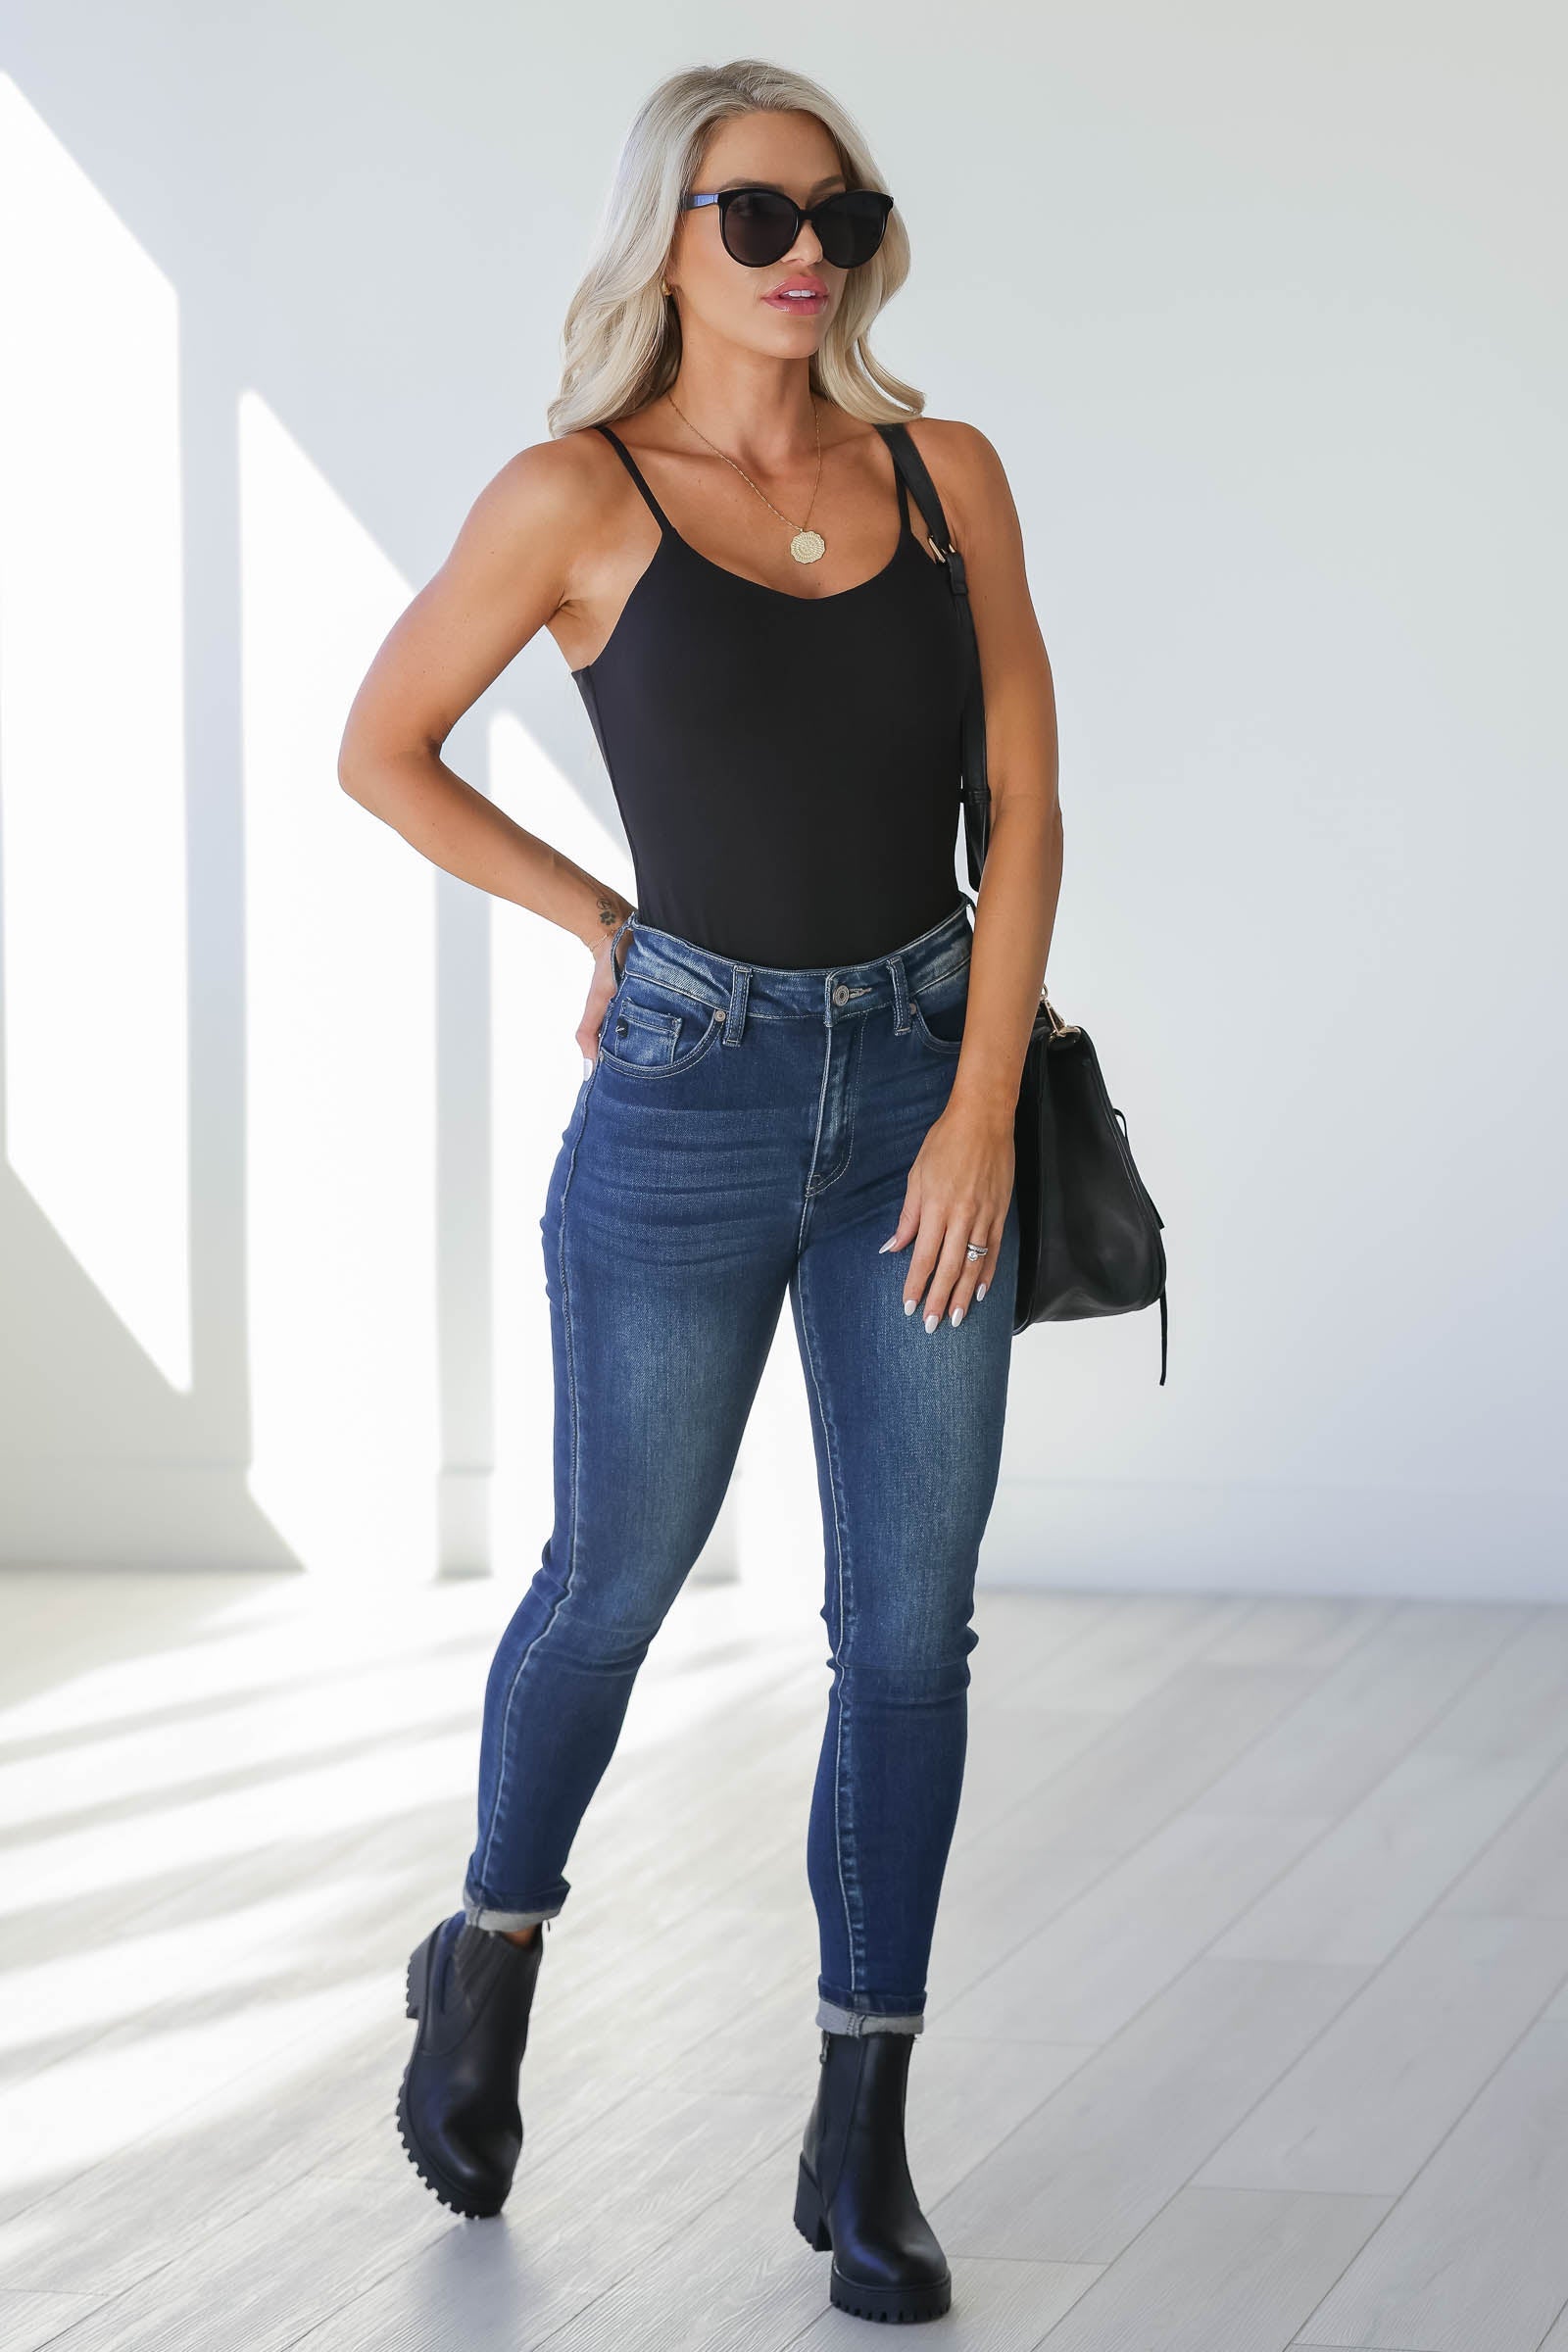 So Easy To Love Bodysuit - Black, Closet Candy, 1